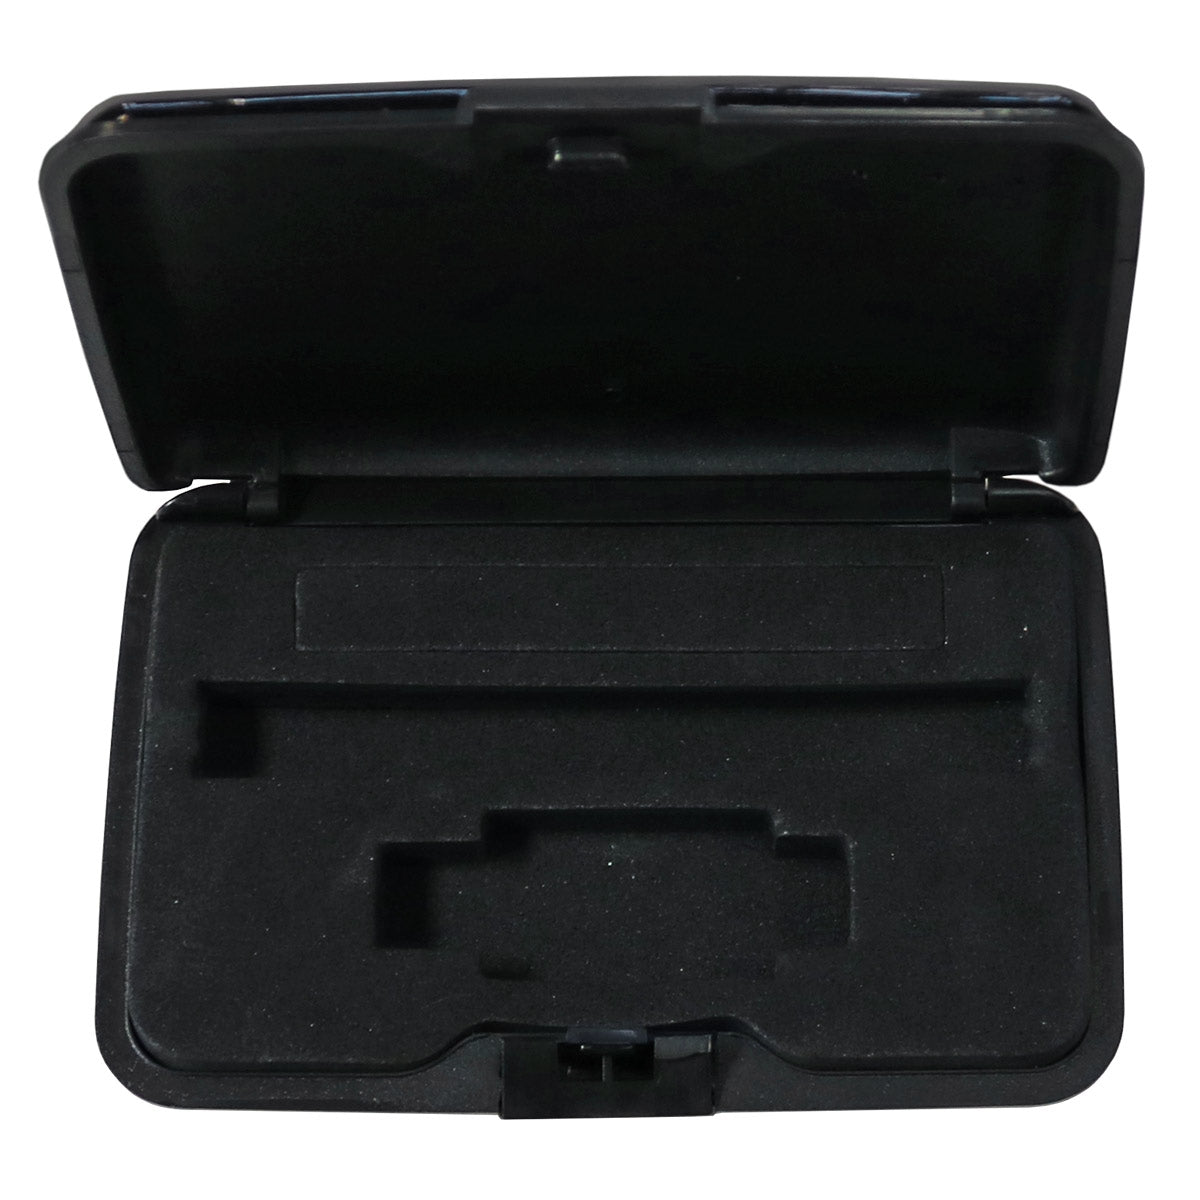 Black Wallet Carrying Case